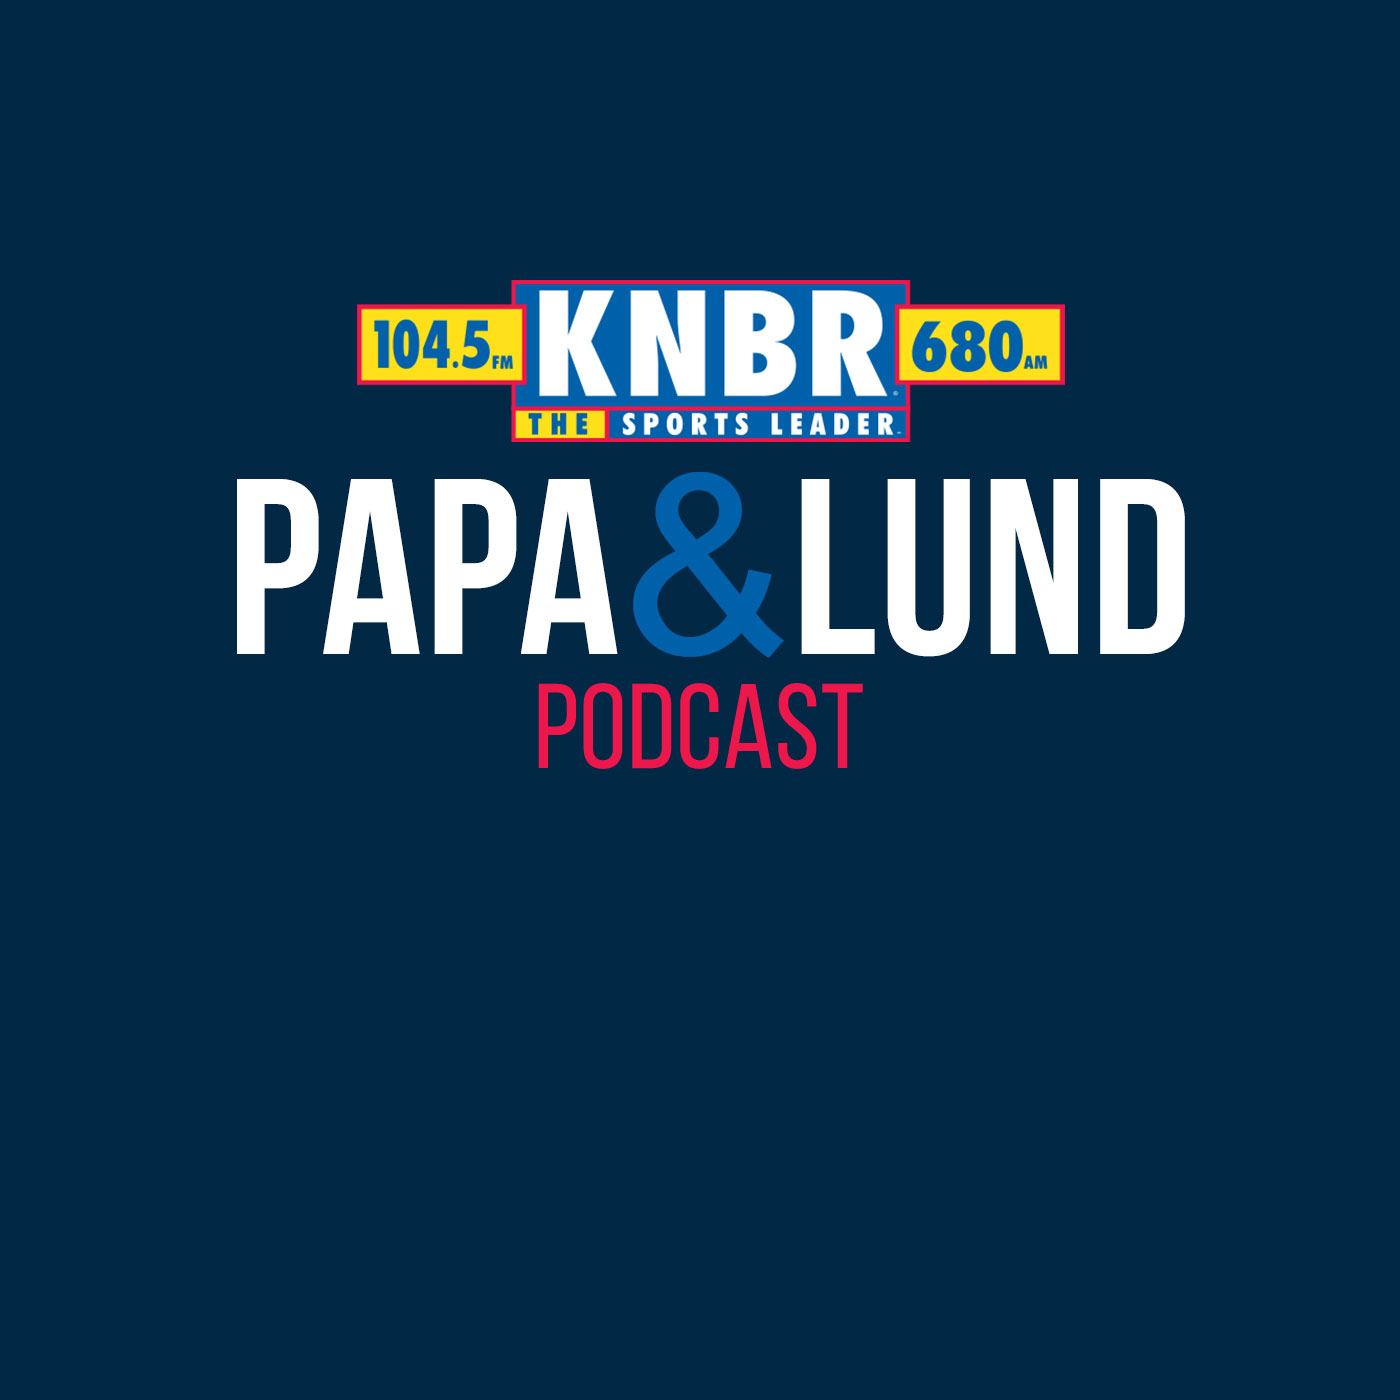 3-7 Joe Ritzo joins Papa & Lund to discuss the top storylines of Spring Training for the Giants, including what the young pitching staff looks like as well as his thoughts on the new look 2024 San Francisco Giants